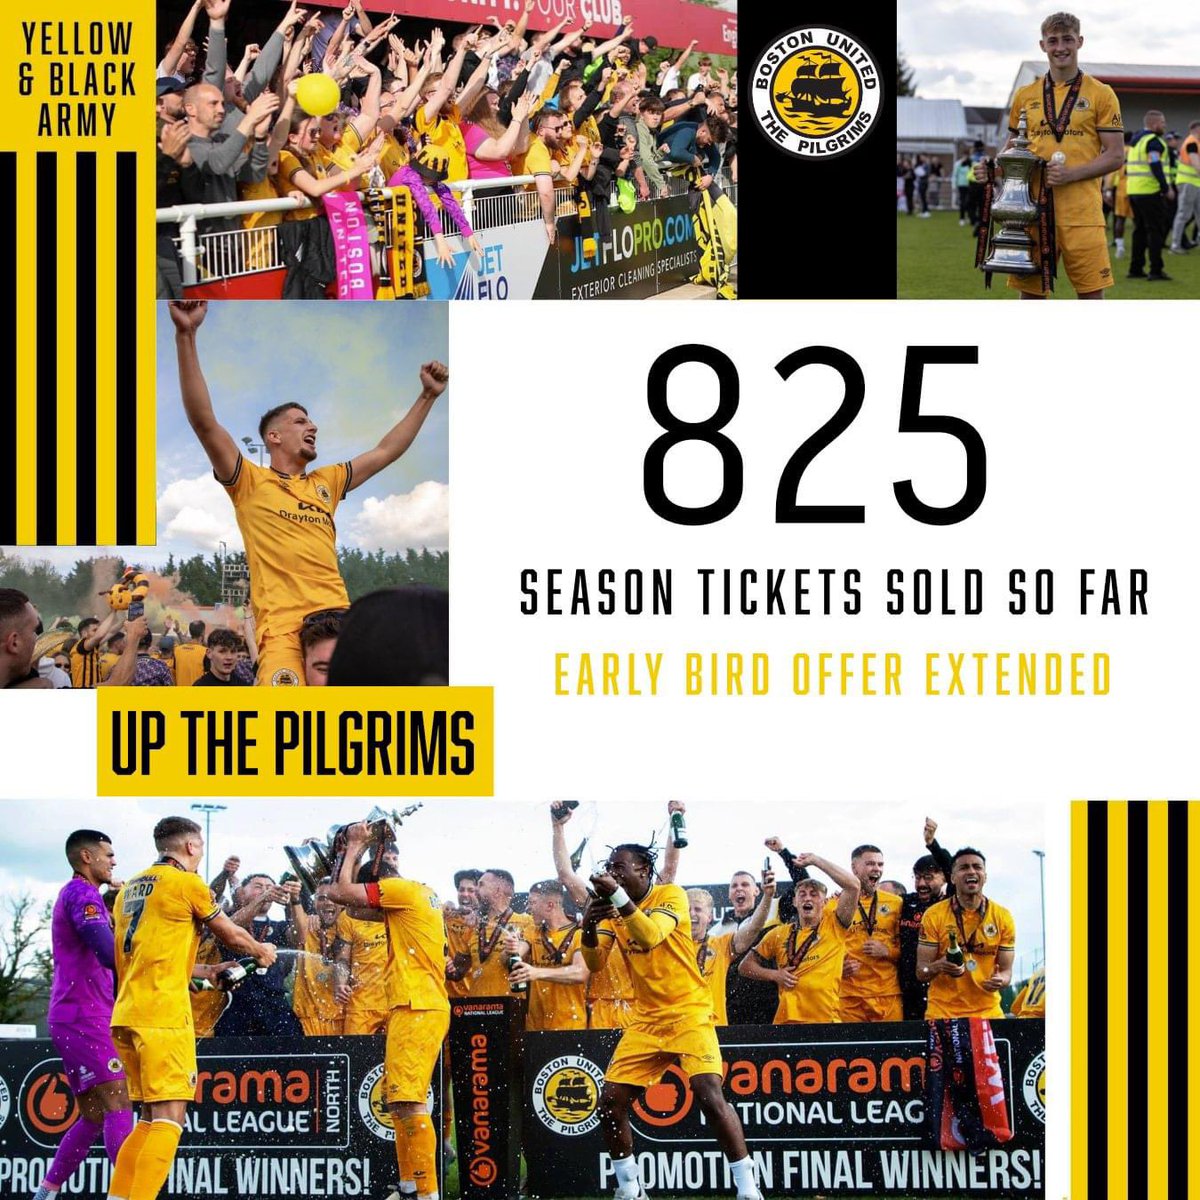 Amazing response to our season ticket offer with 8️⃣2️⃣5️⃣ sold so far 👏 

It would be great if we can hit the magic 1️⃣0️⃣0️⃣0️⃣

To help achieve this we are extending the Early Bird offer until midnight on Sunday 9th June so as many fans as possible can take advantage of the offer.